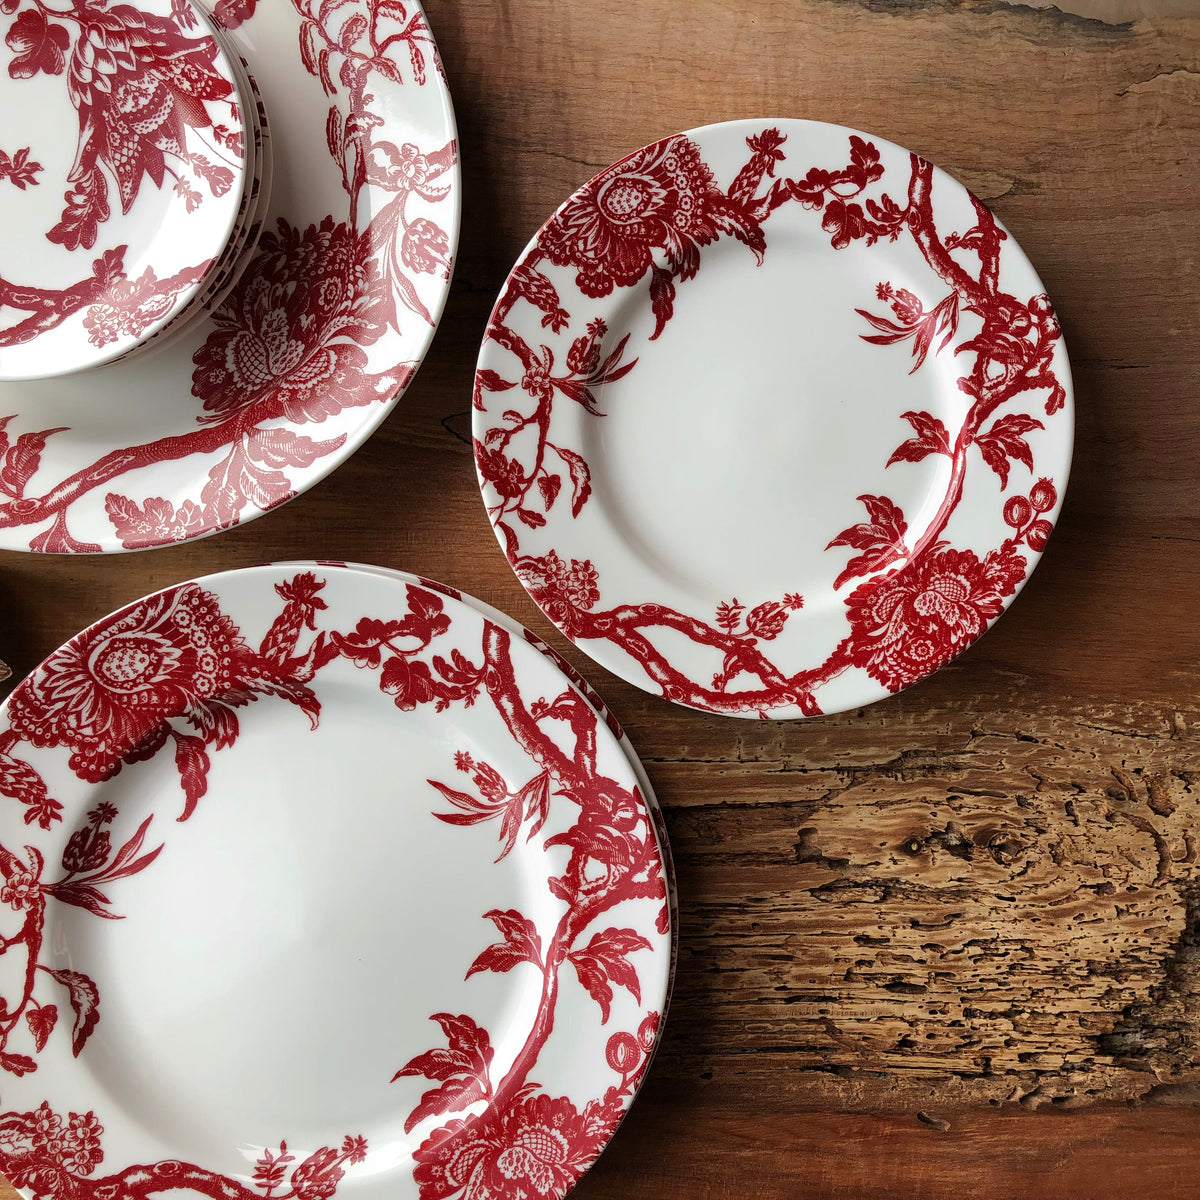 A Arcadia Salad Plate Crimson collection by Caskata Artisanal Home of crimson red plates on a wooden table.